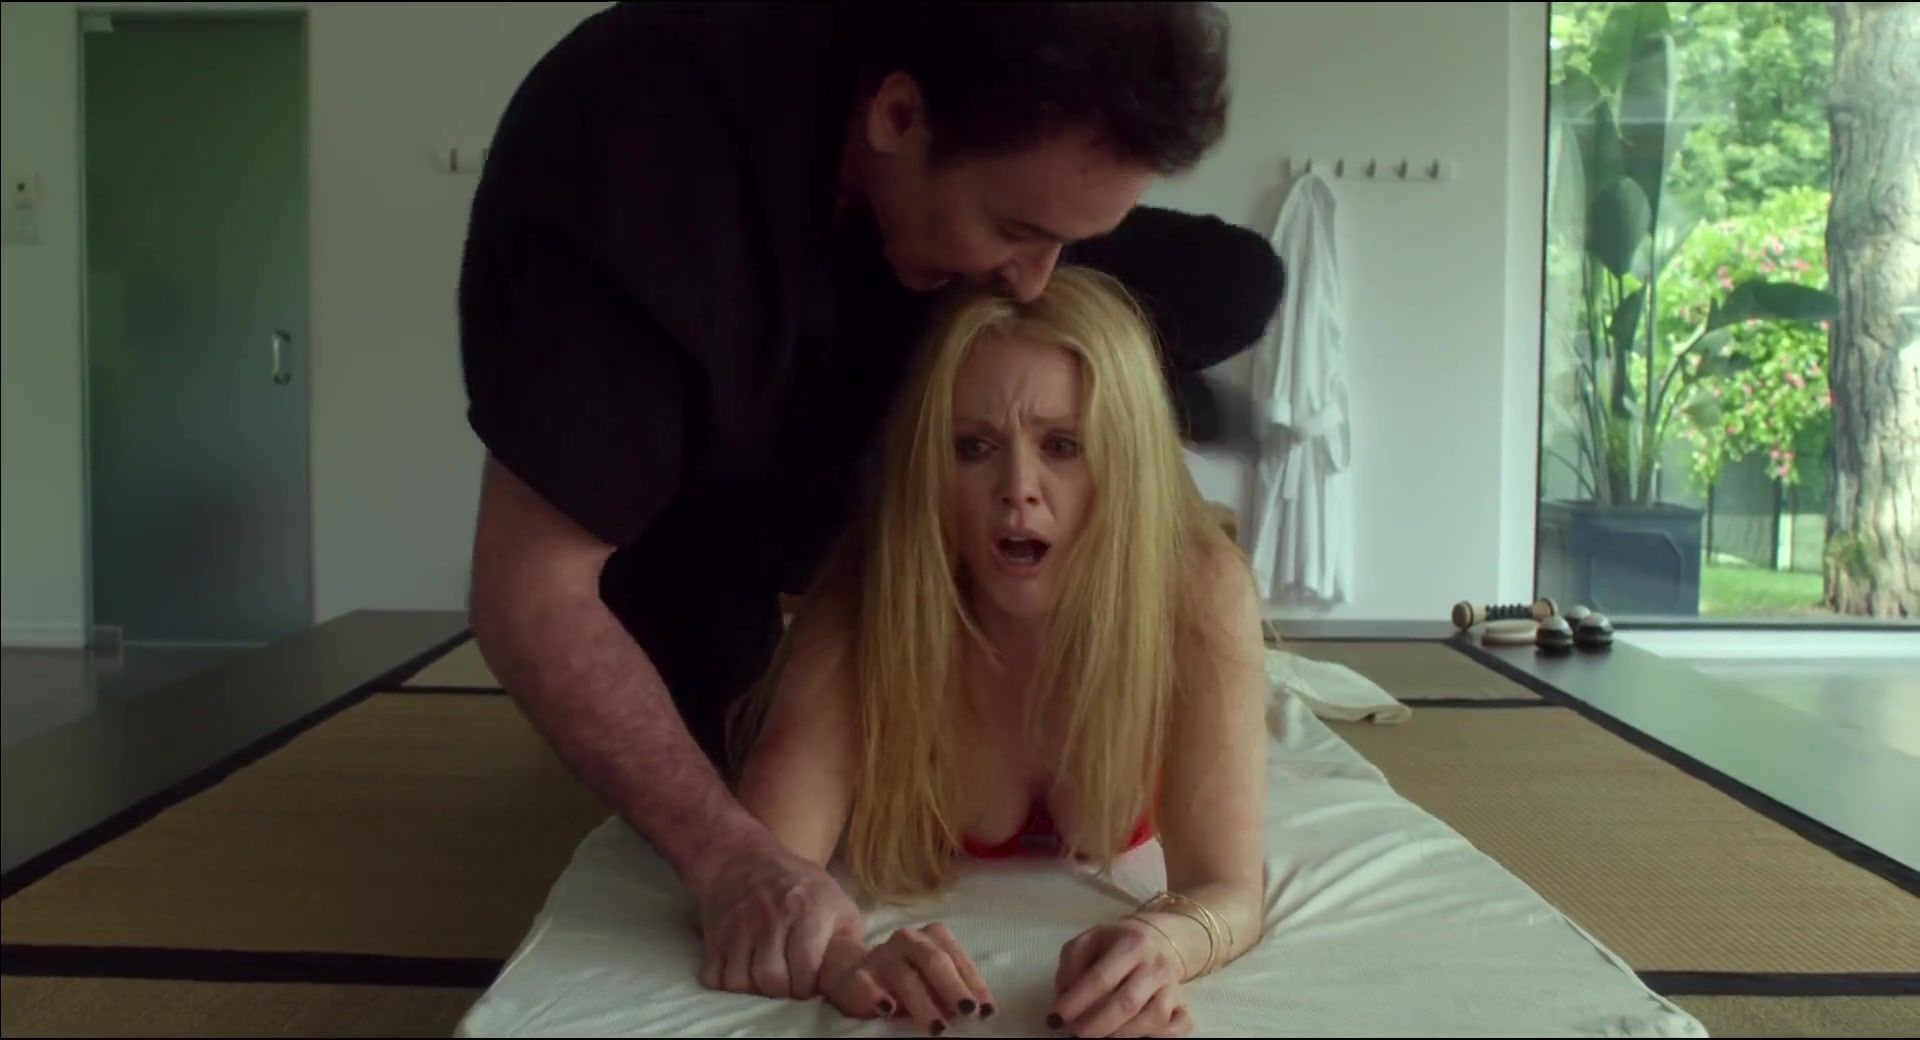 Cocksuckers Submission video & Lesbian Celebs Scene | Celebrity: Julianne Moore nude | The movie "Maps to the Stars" Boy Fuck Girl